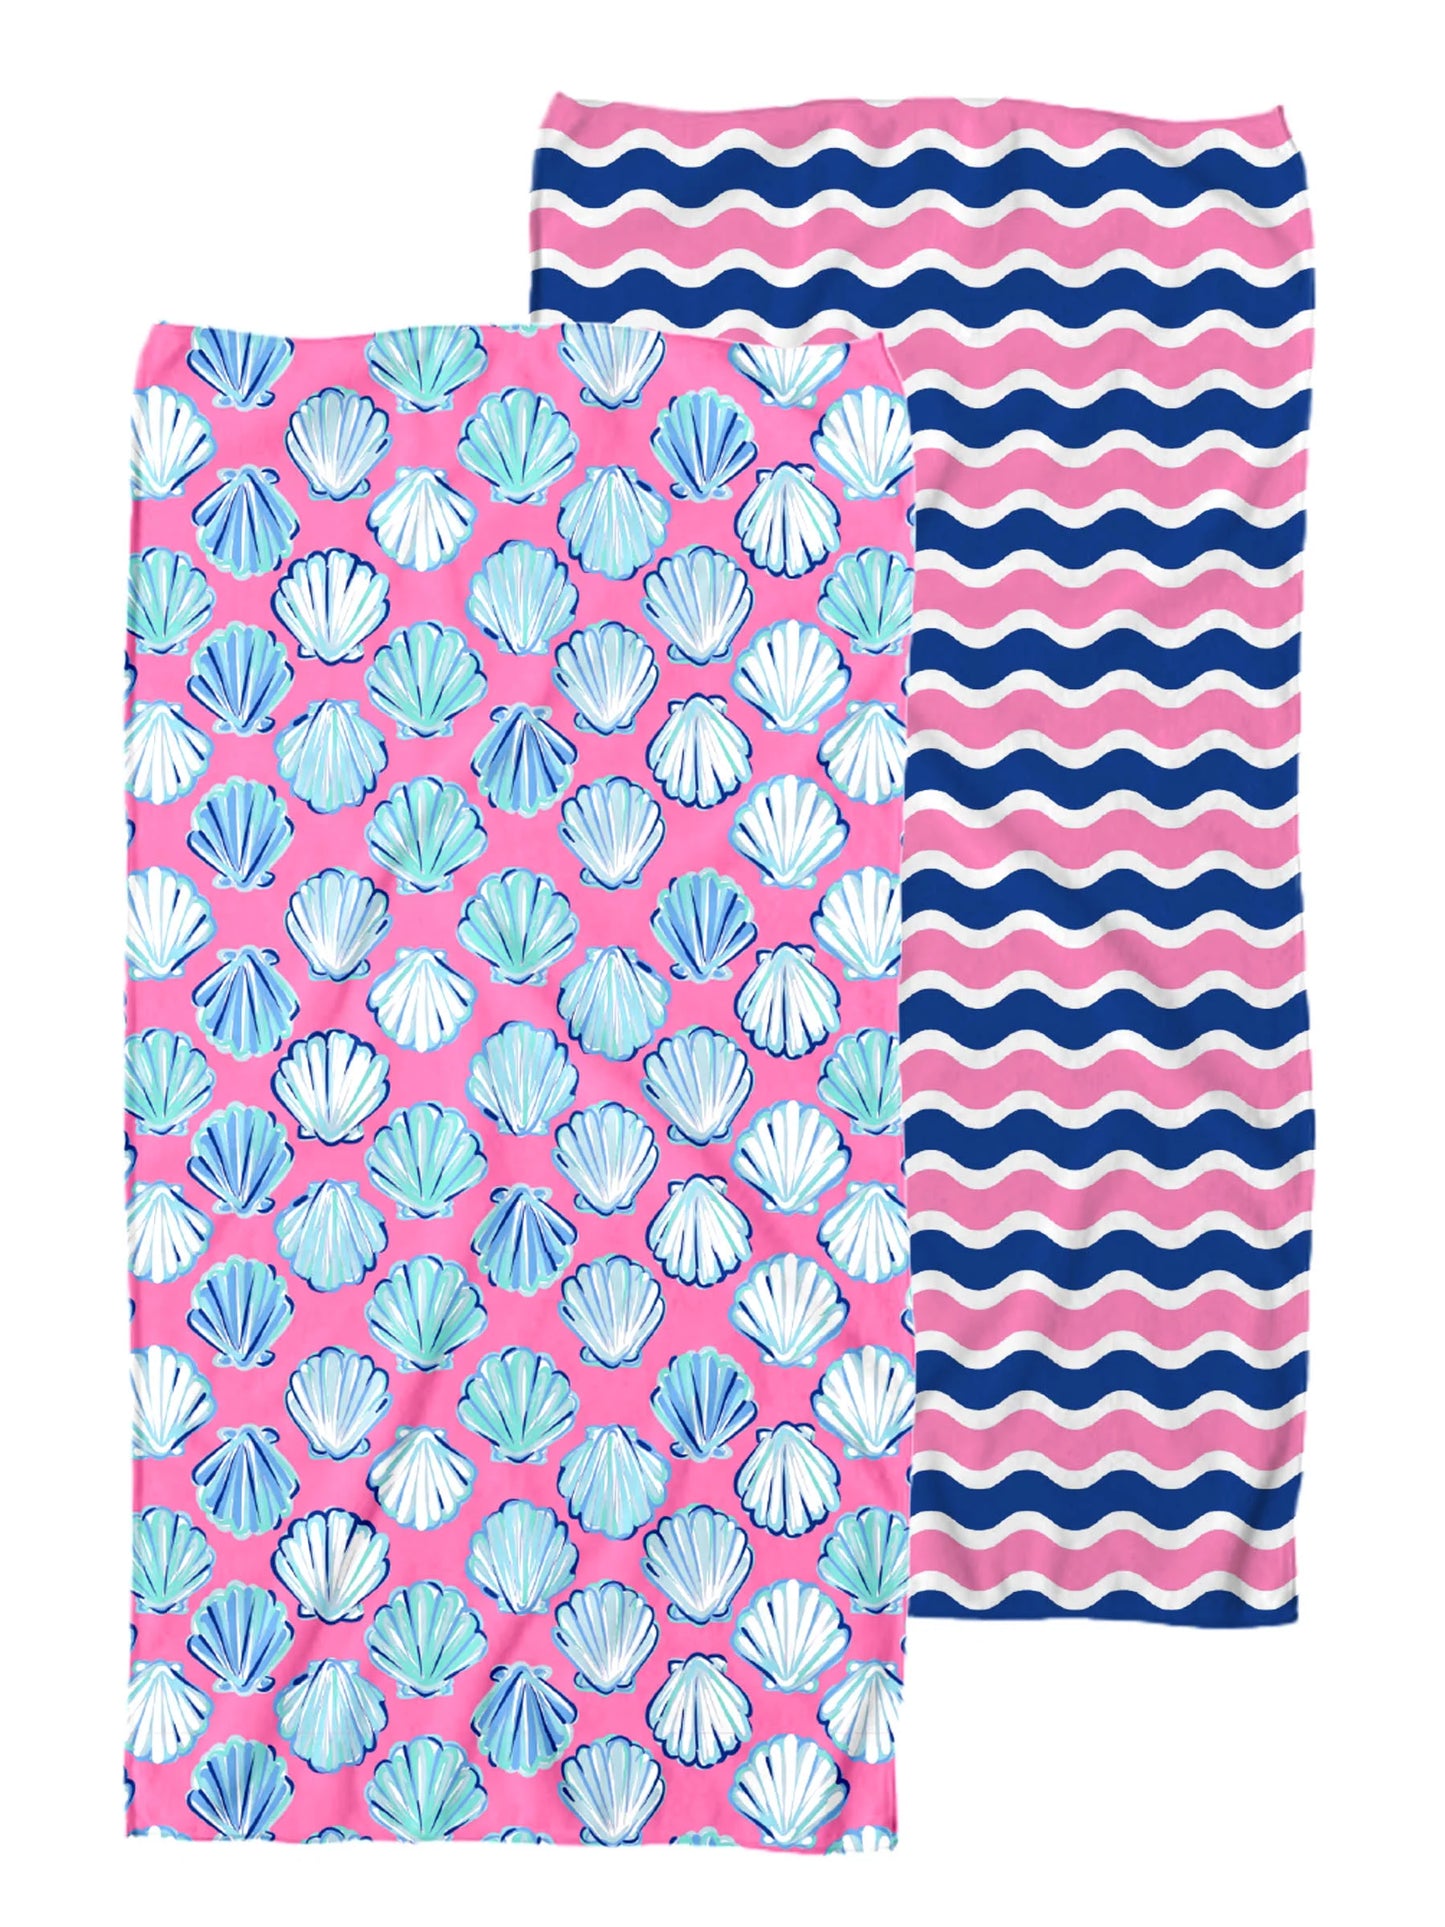 two sided towel. one side is a pink base with blue seashells. the other side is navy, white, and pink waved lines